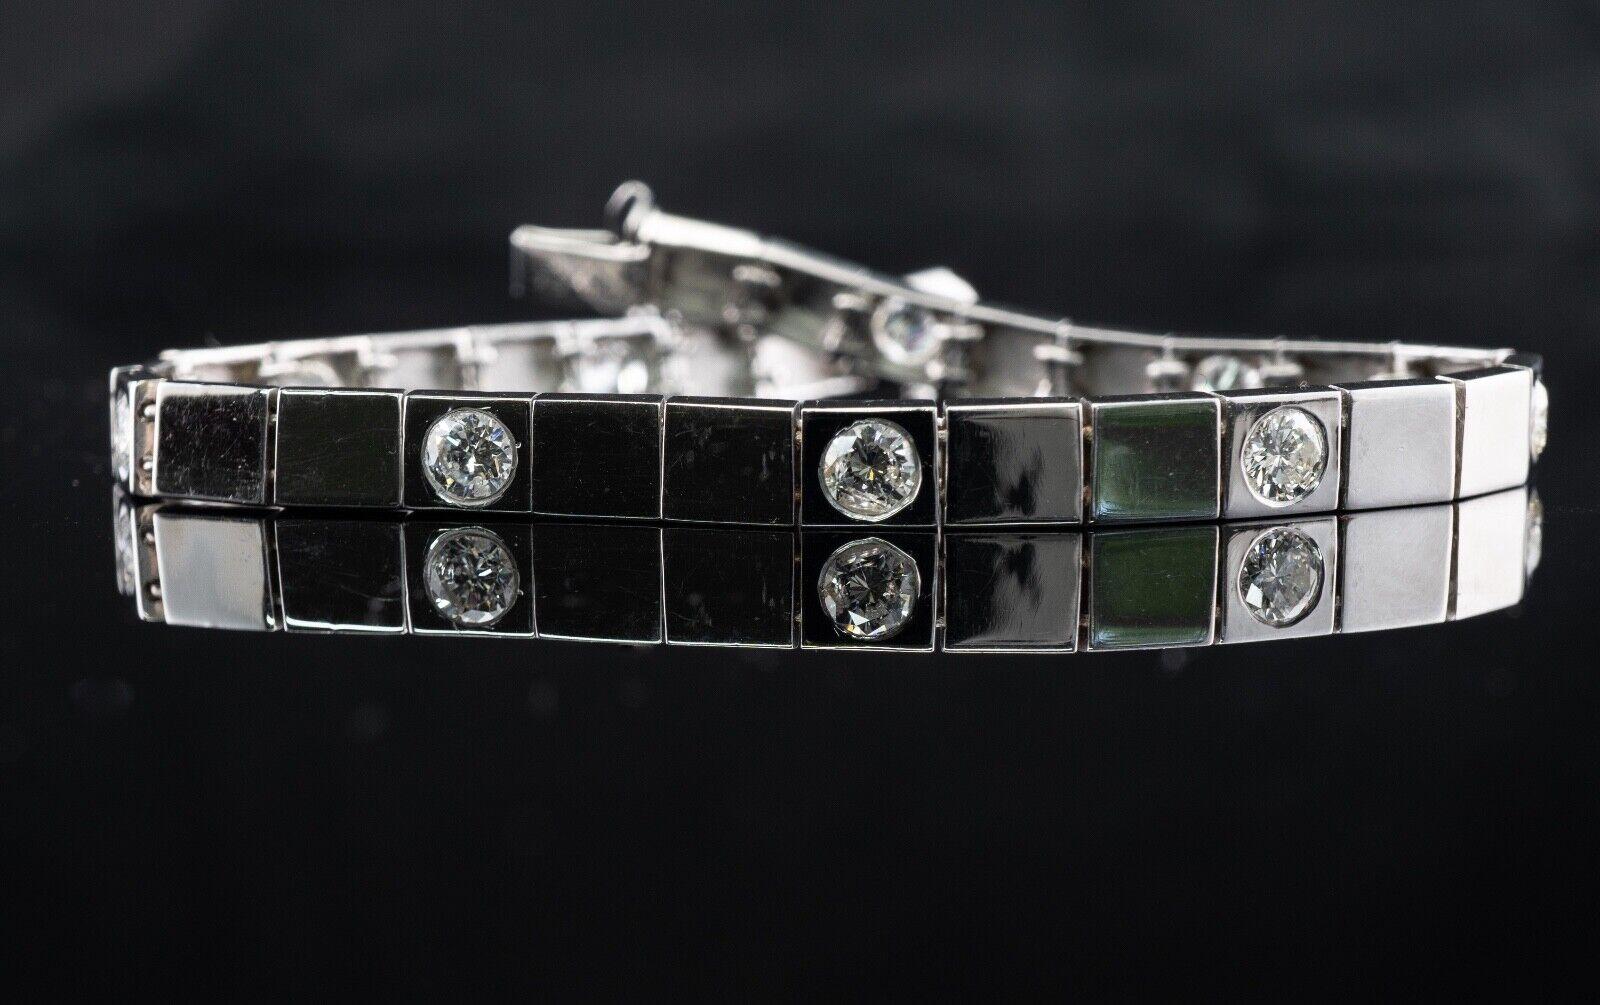 This estate solid 14K White Gold bracelet is set with nine white and fiery round brilliant cut diamonds. The diamonds are SI2 clarity and HI color. The total weight is 2.70 carats. The bracelet has a patent number, please see the photo. The width of